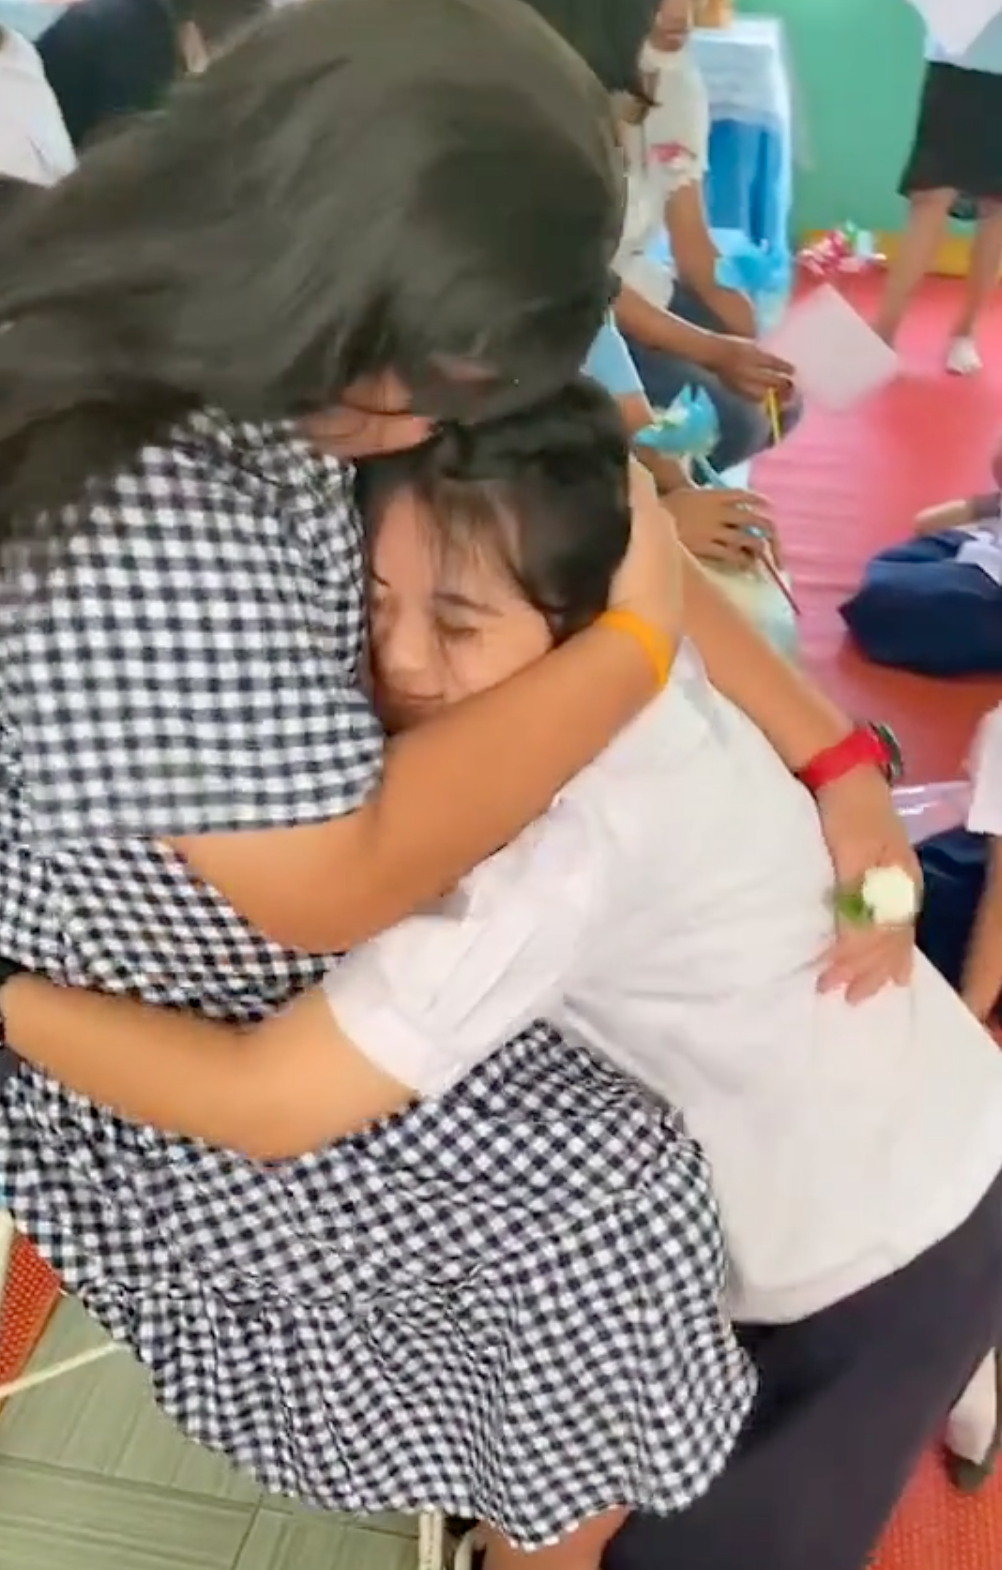 They shared a long embrace during the event. | Source: TikTok.com/joey_kp